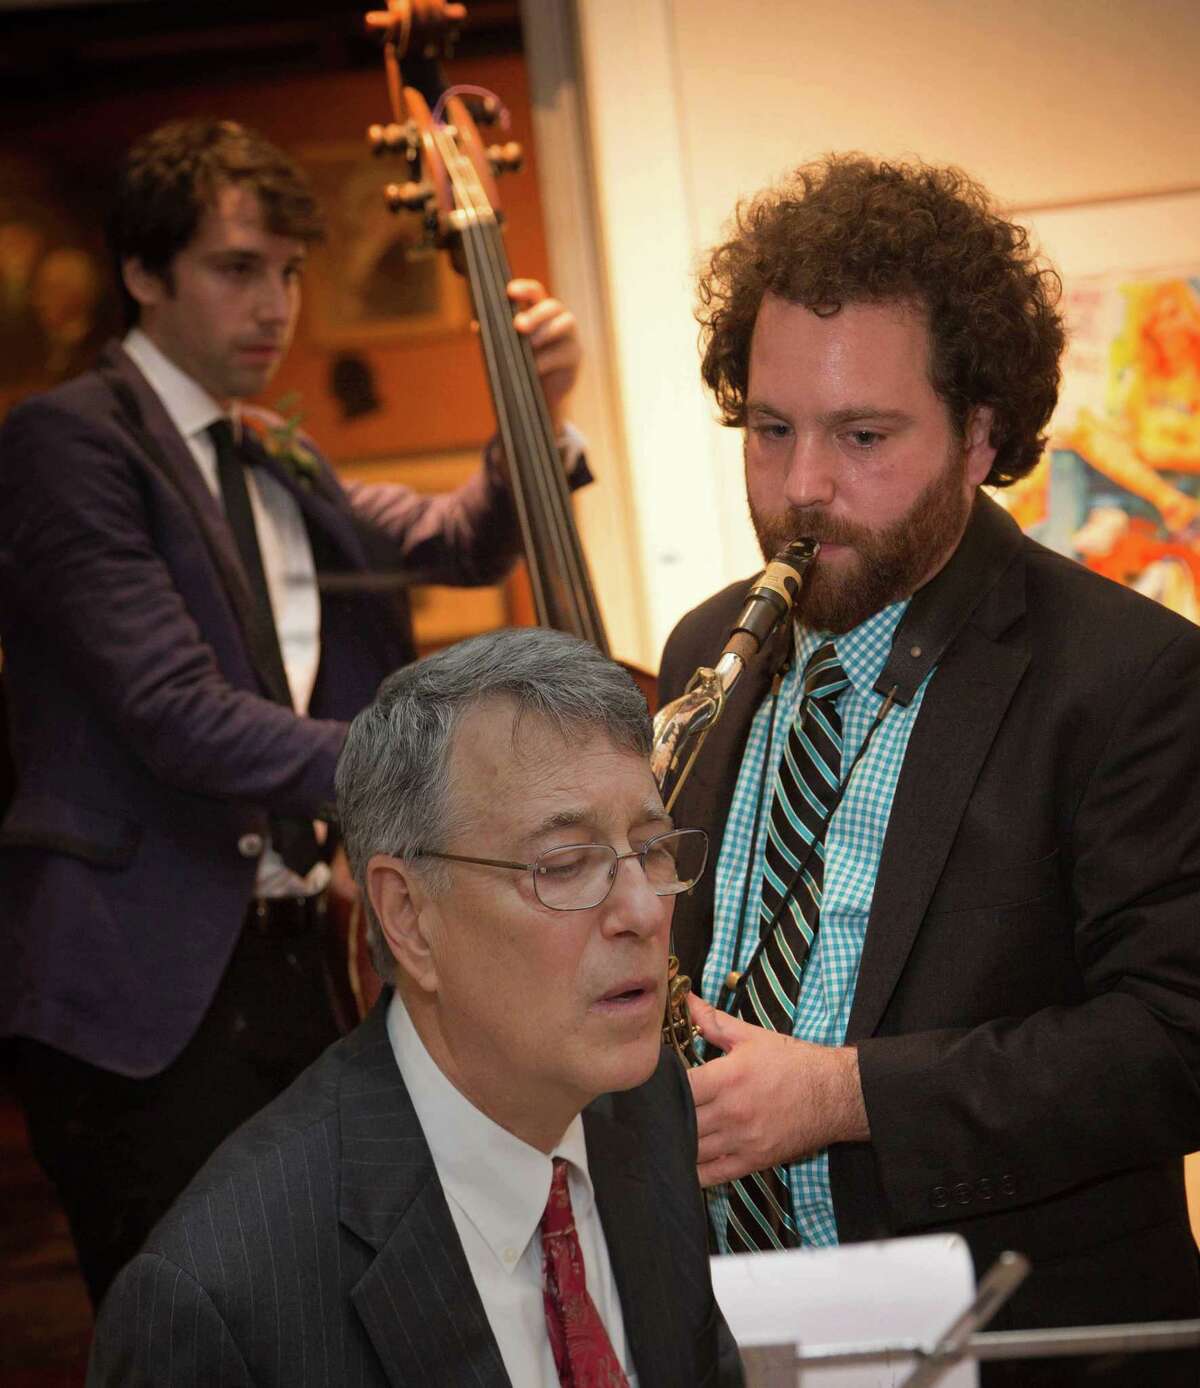 “The Library Suite,” a multi-media jazz premiere, is taking place at the Pequot Library in Fairfield April 28. The music is by Fairfield resident Mark Edinberg, front, who will perform with his sons, Dan (bass) and Joel Edinberg (sax and a new woodwind instrument called a Vindor ES1).